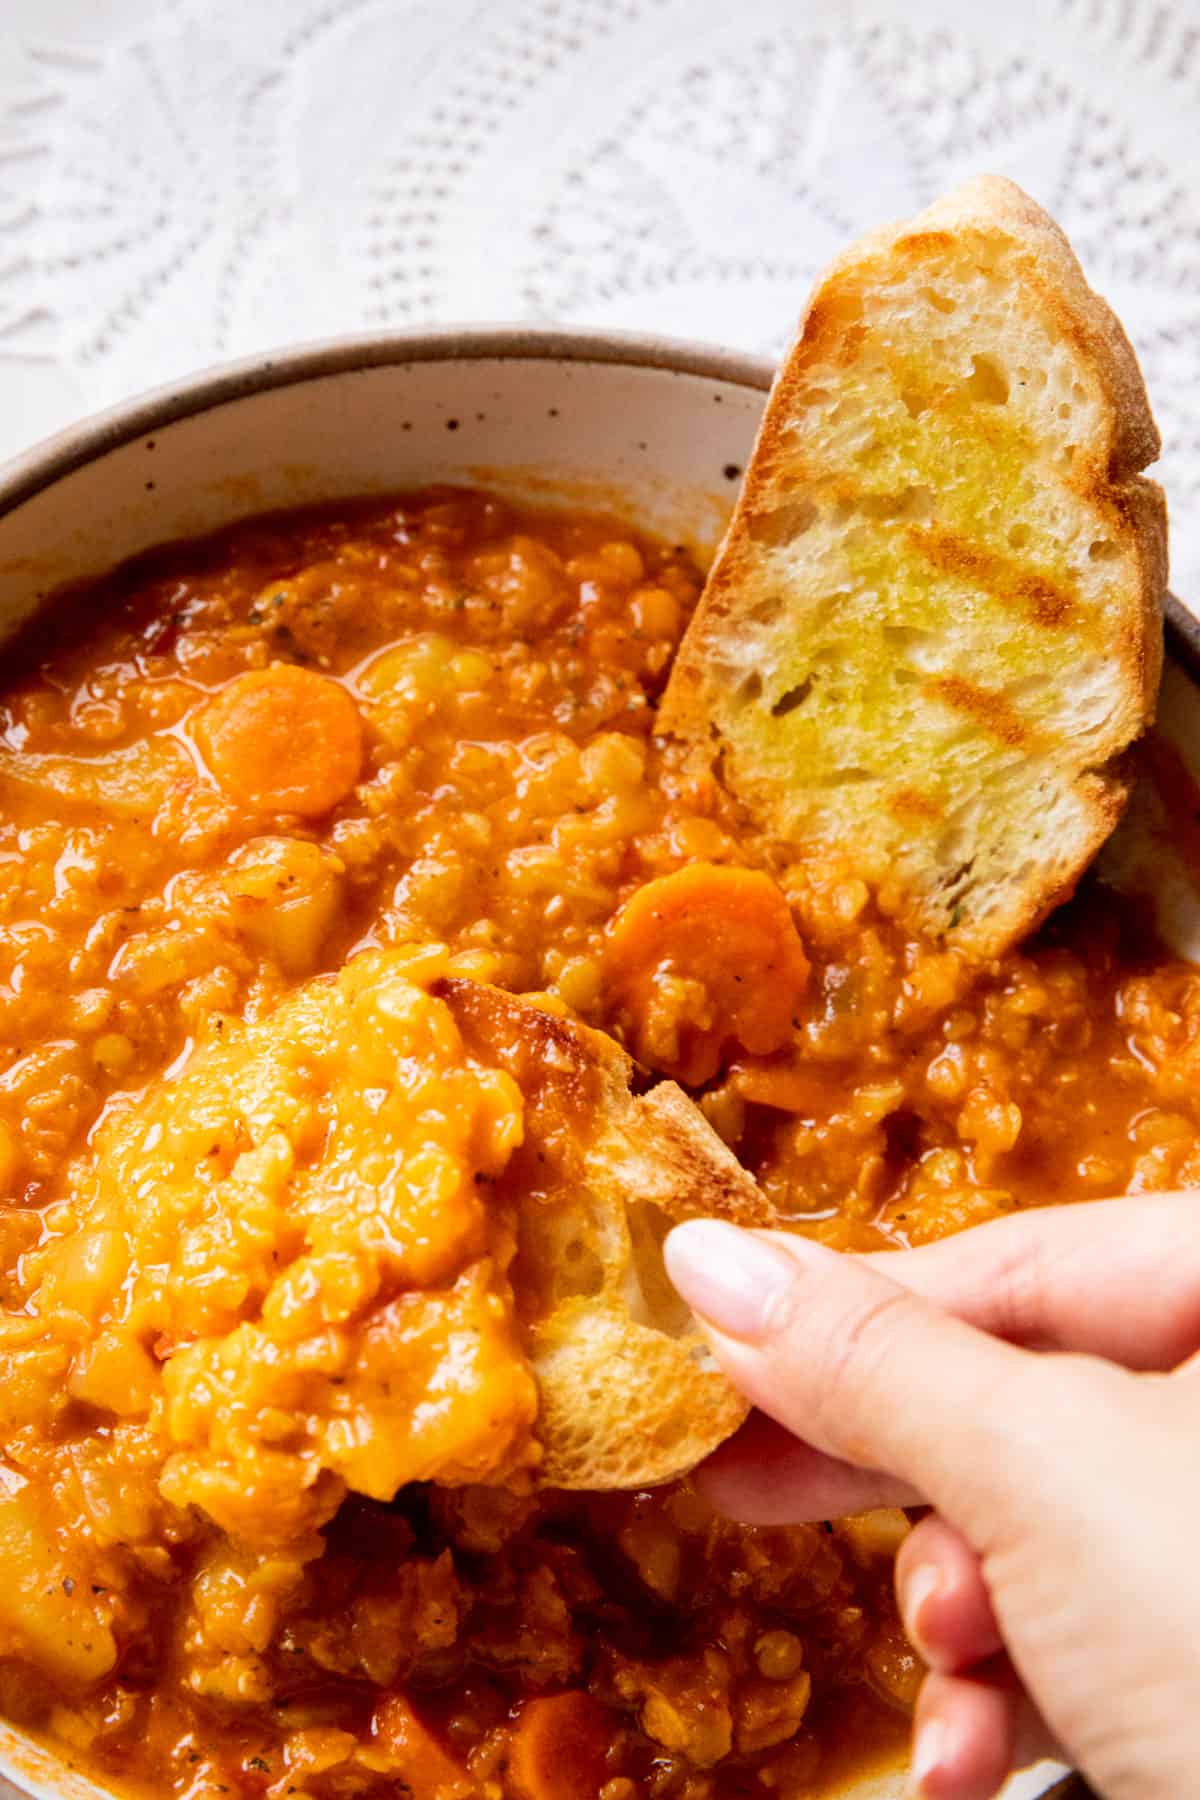 lentil soup being scooped up by woman's hand